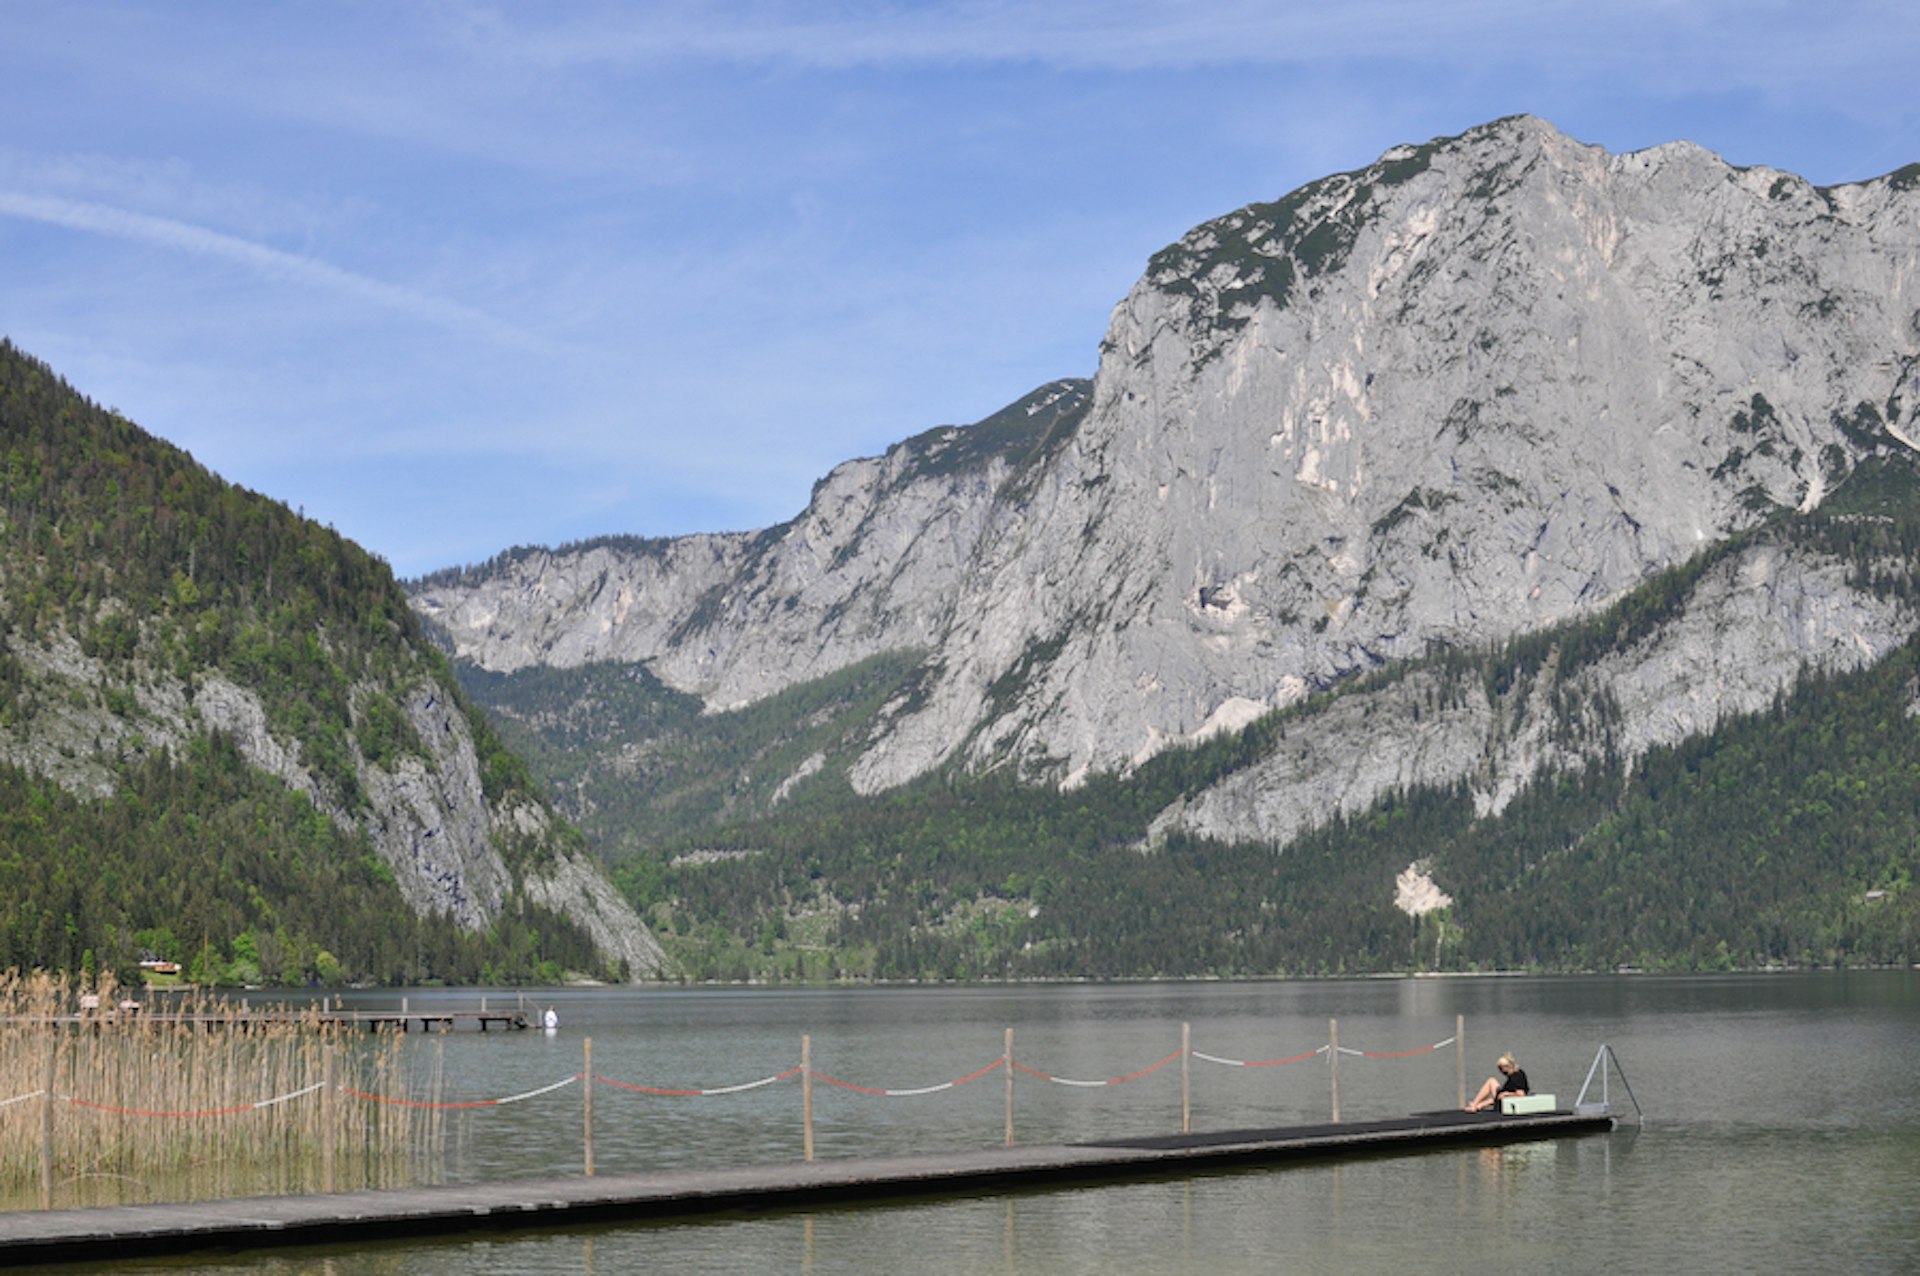 A bather sits on a long dock jutting out into the water with dramatic rocky mountains in the distance at Altausseer see, Upper Austria, Austra